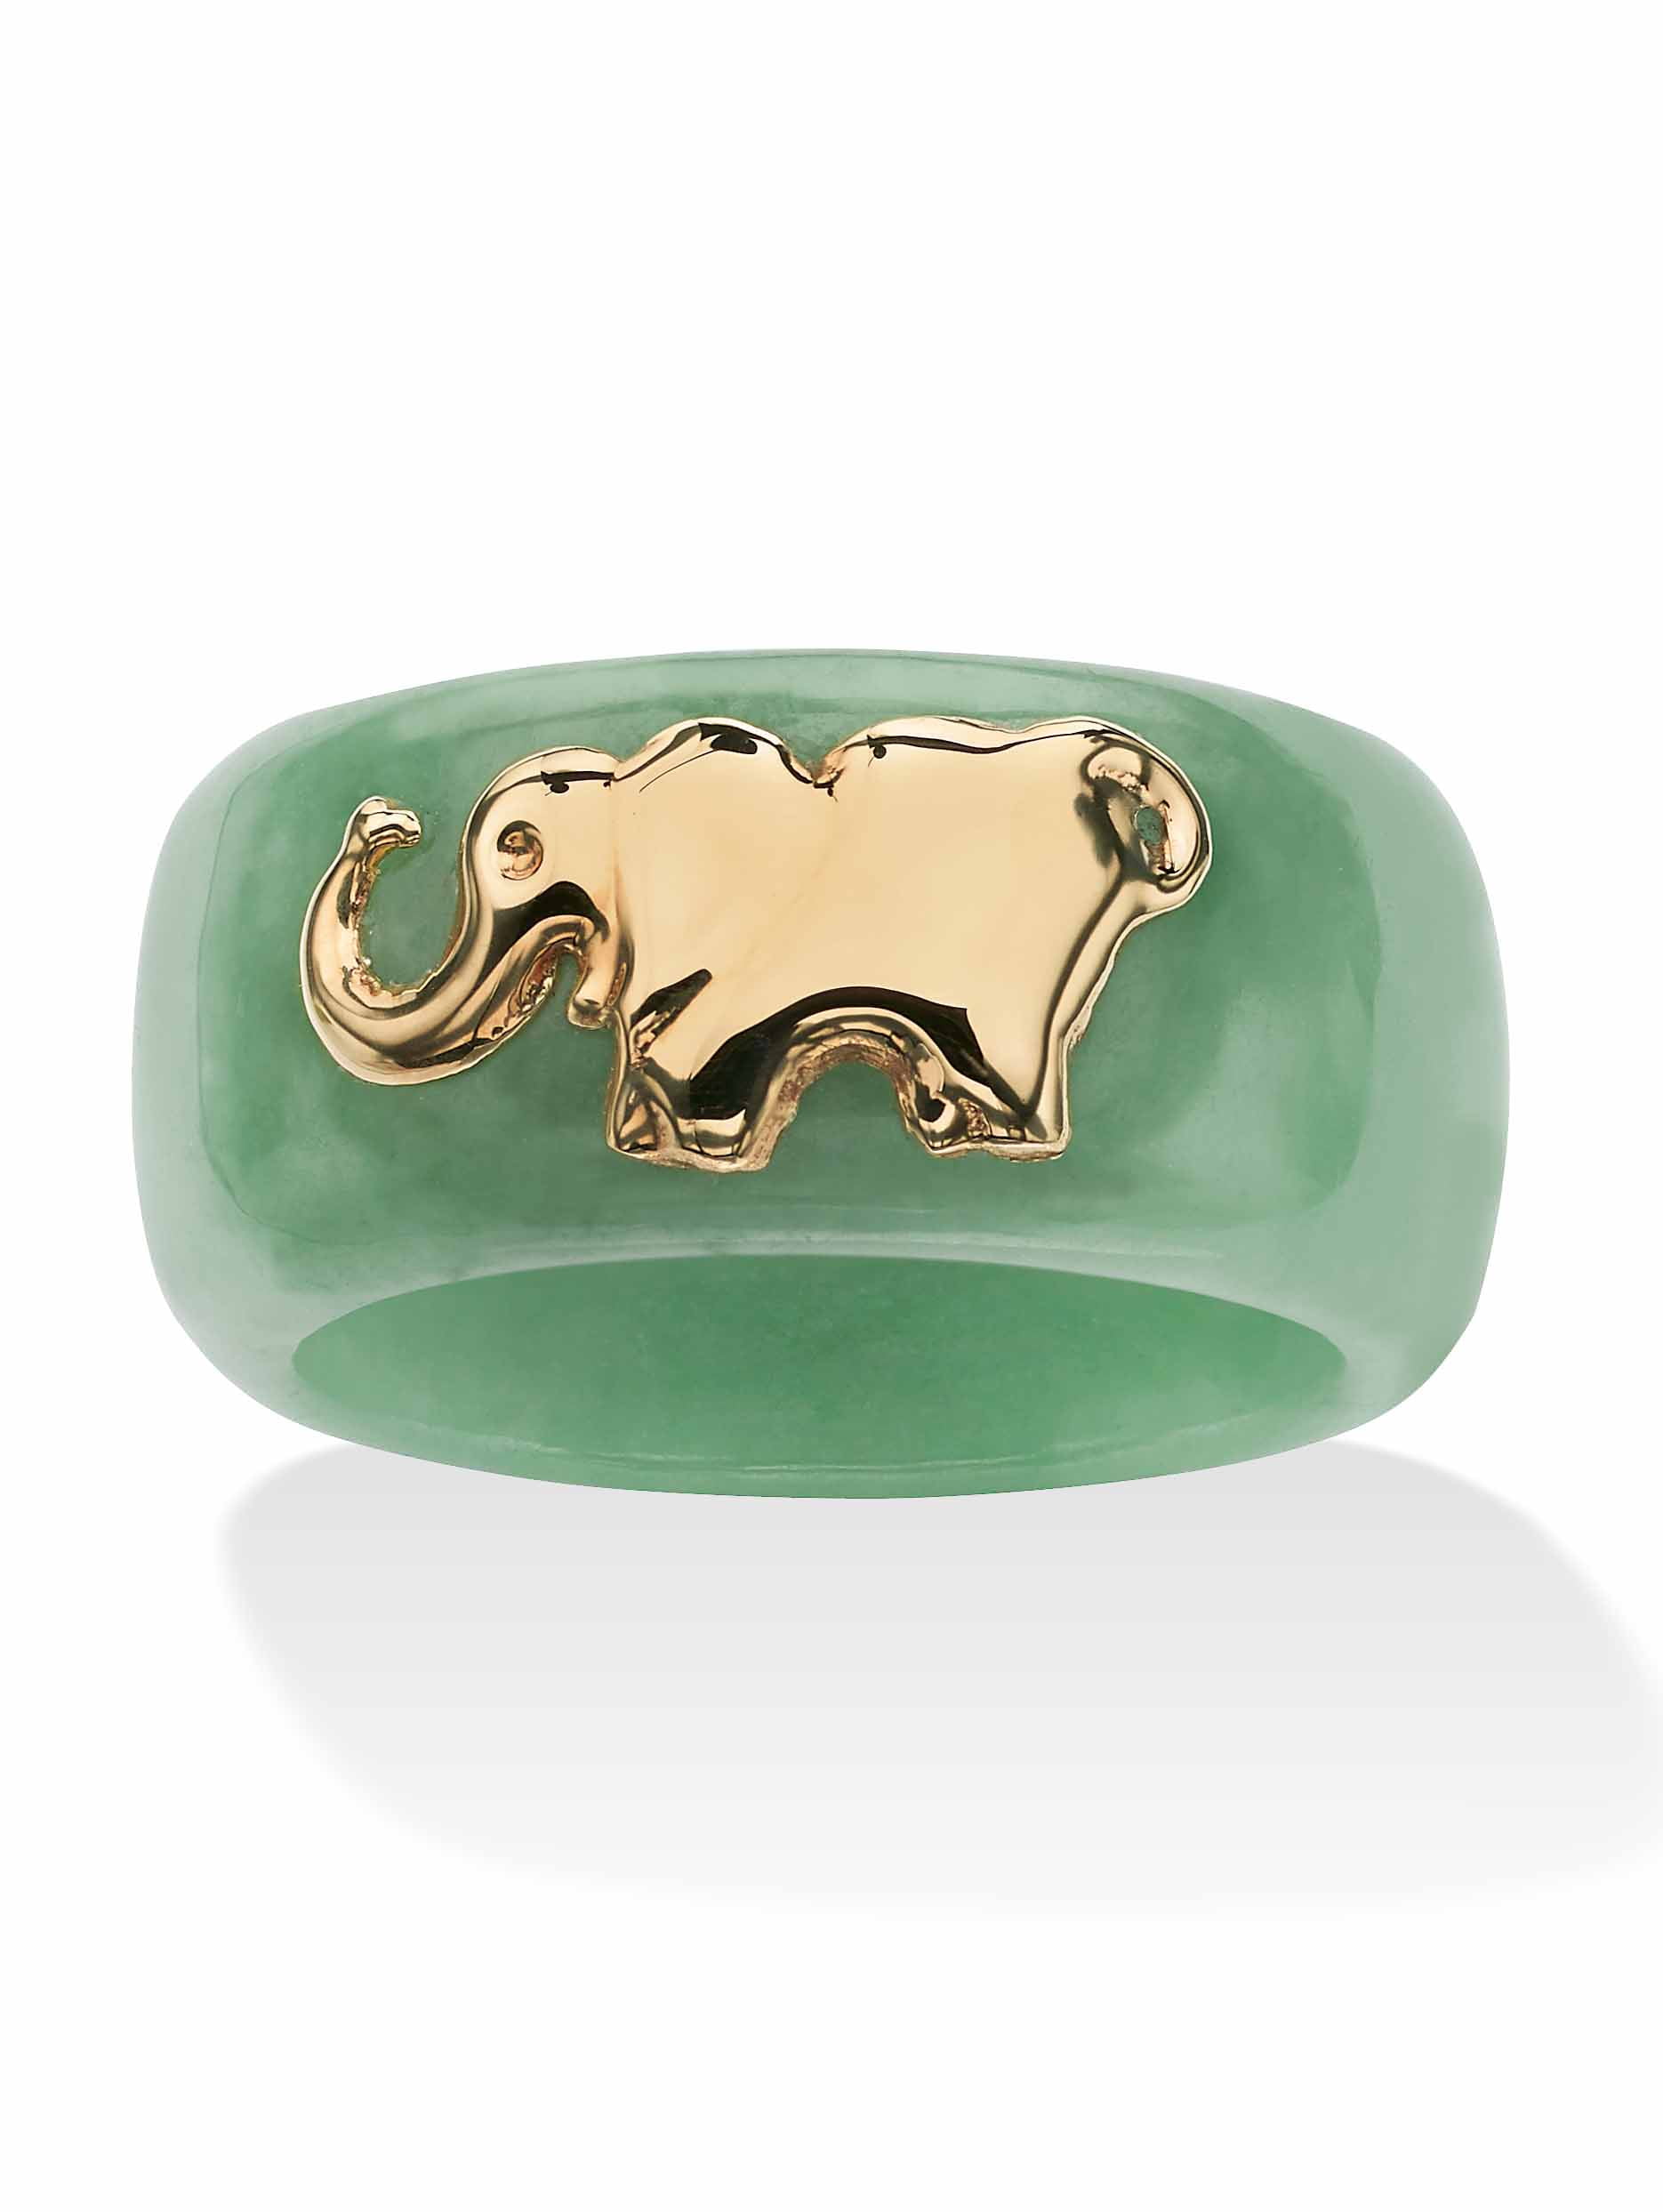 Lucky Elephant Candle Carrying Fruit Jade Green Colour Large 